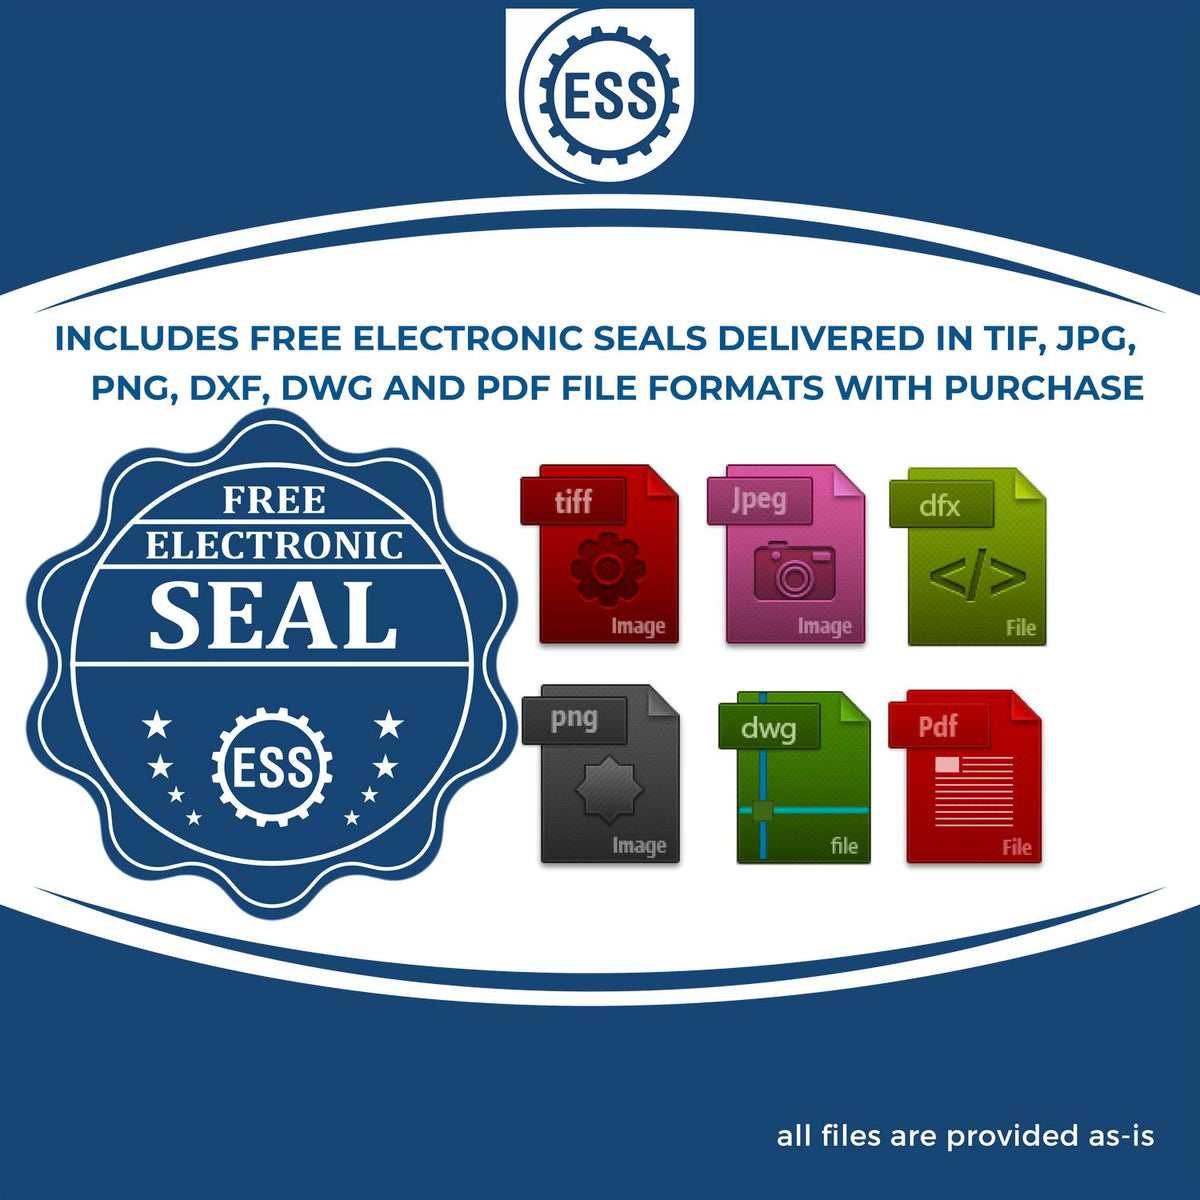 An infographic for the free electronic seal for the MaxLight Premium Pre-Inked Mississippi State Seal Notarial Stamp illustrating the different file type icons such as DXF, DWG, TIF, JPG and PNG.